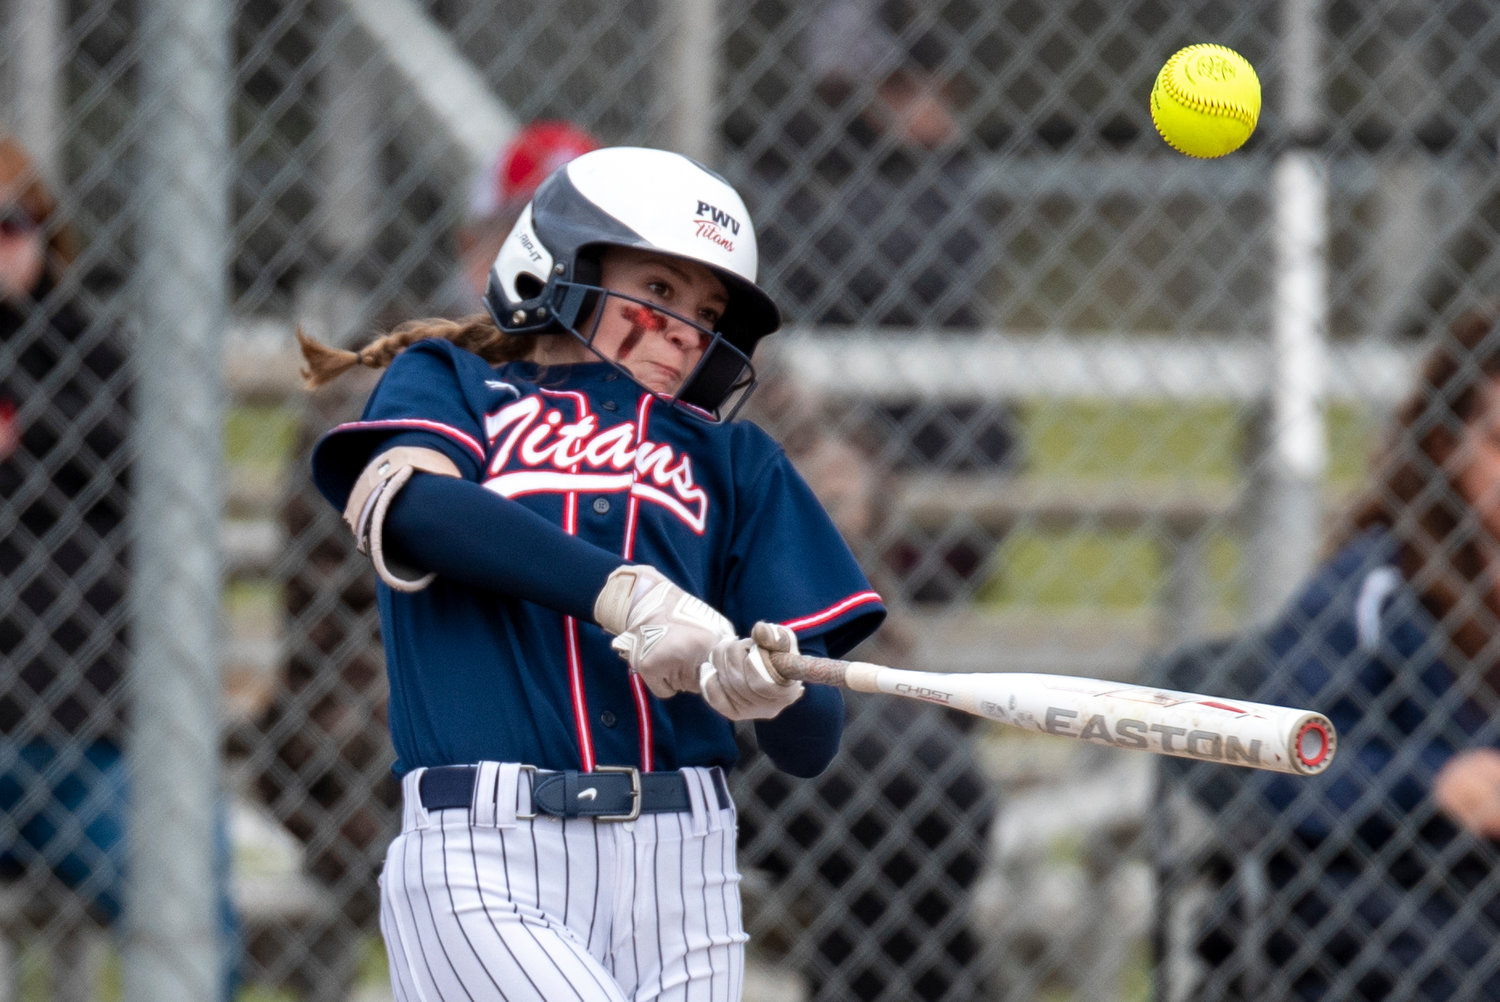 Willapa Valley's Lauren Matlock drives the ball during a 2B Pacific League home game against Forks on April 1.